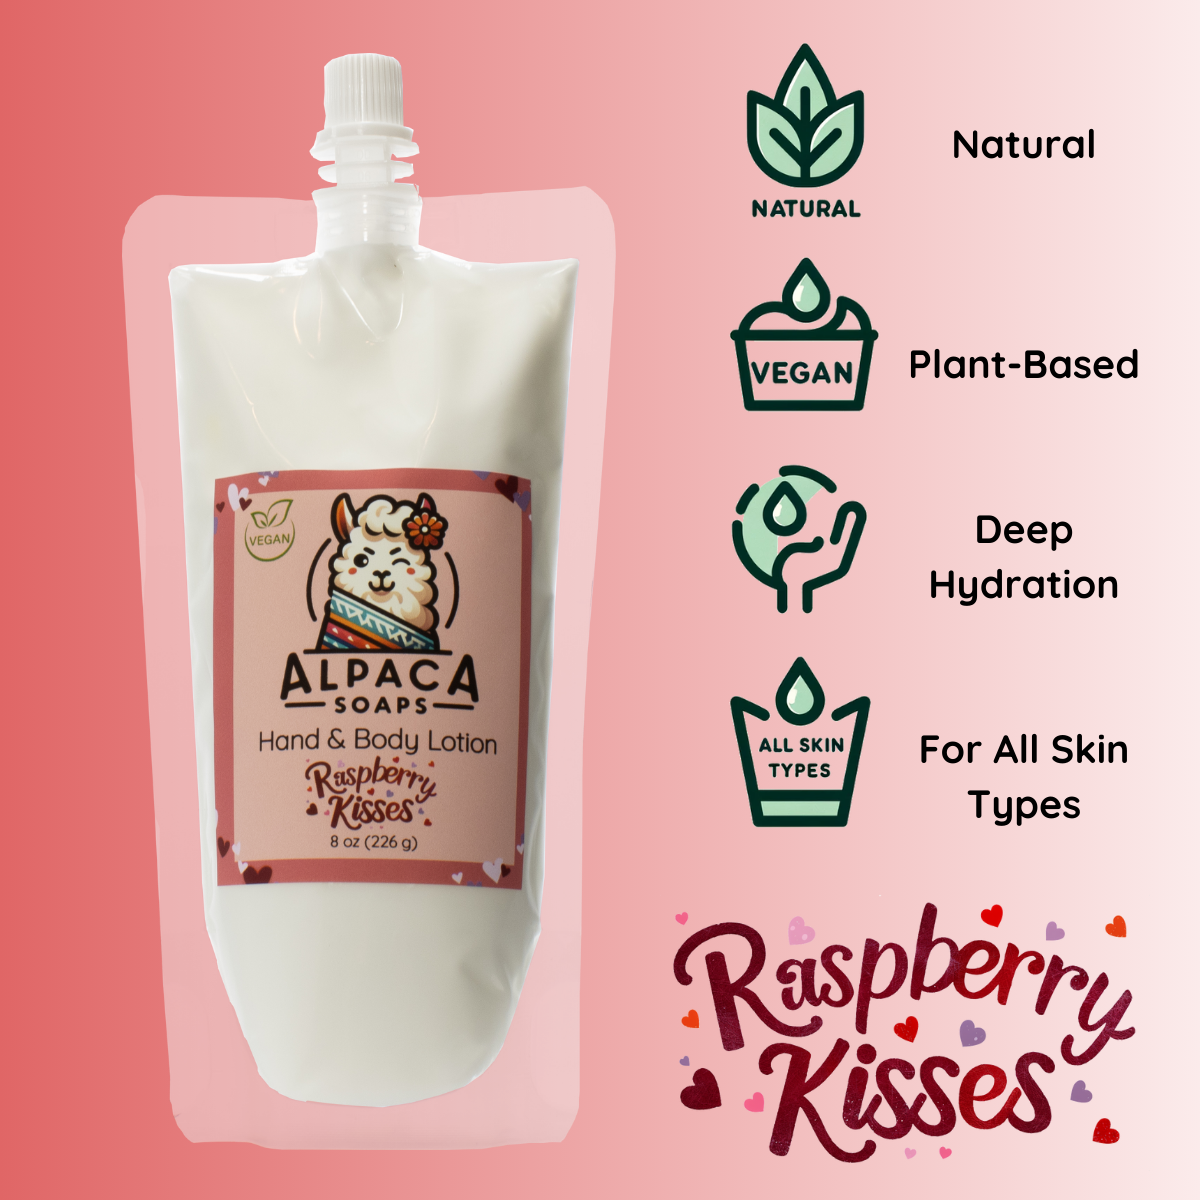 a bottle of alpaca soaps lotion on a pink background, icons that read natural, plant-based, deep hydration, for all skin types